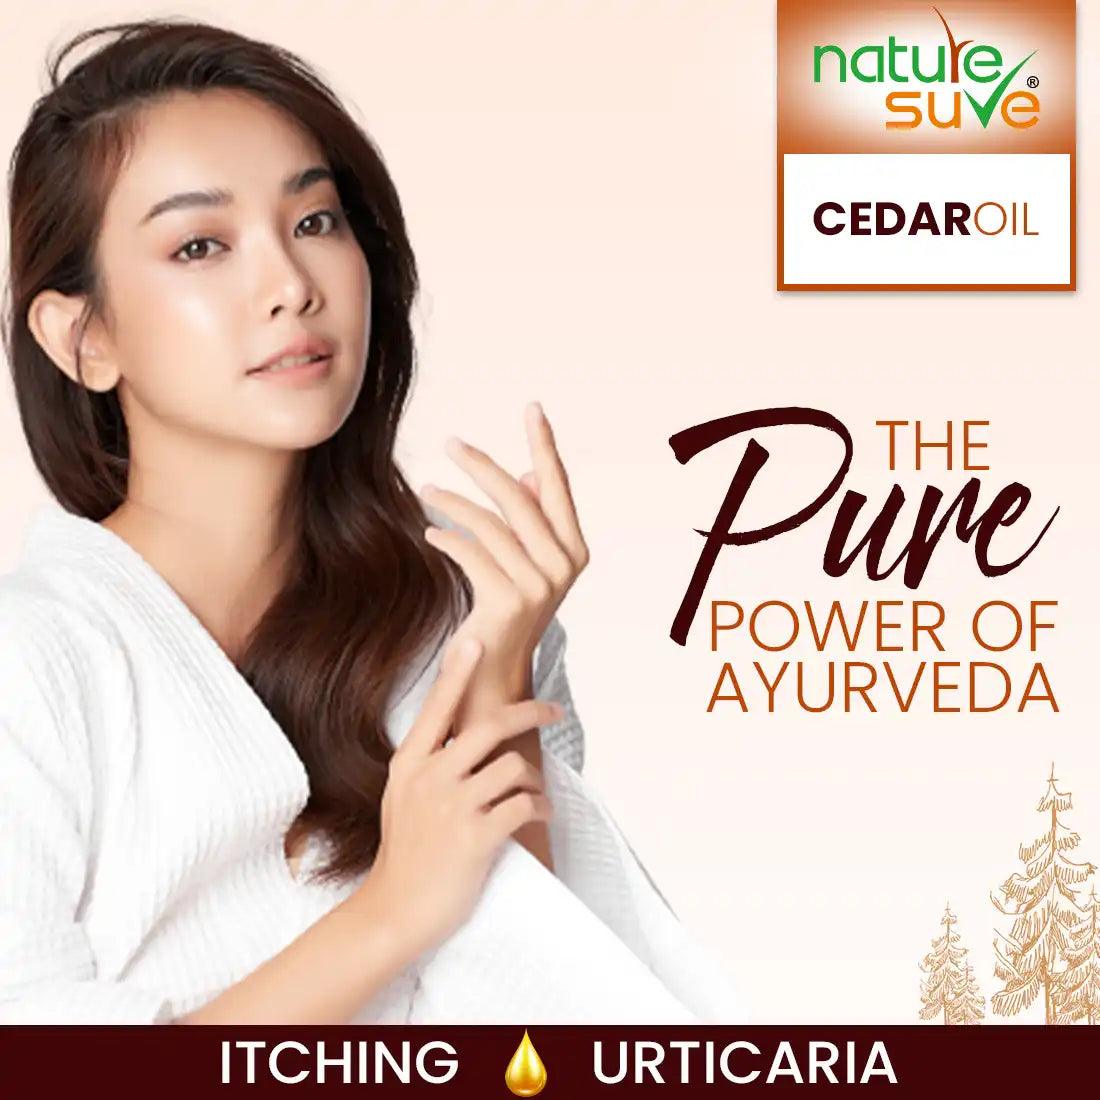 Nature Sure Cedar Oil Deodar Oil for Itching and Urticaria Is Packed With The Pure Power of Ayurveda - everteen-neud.com